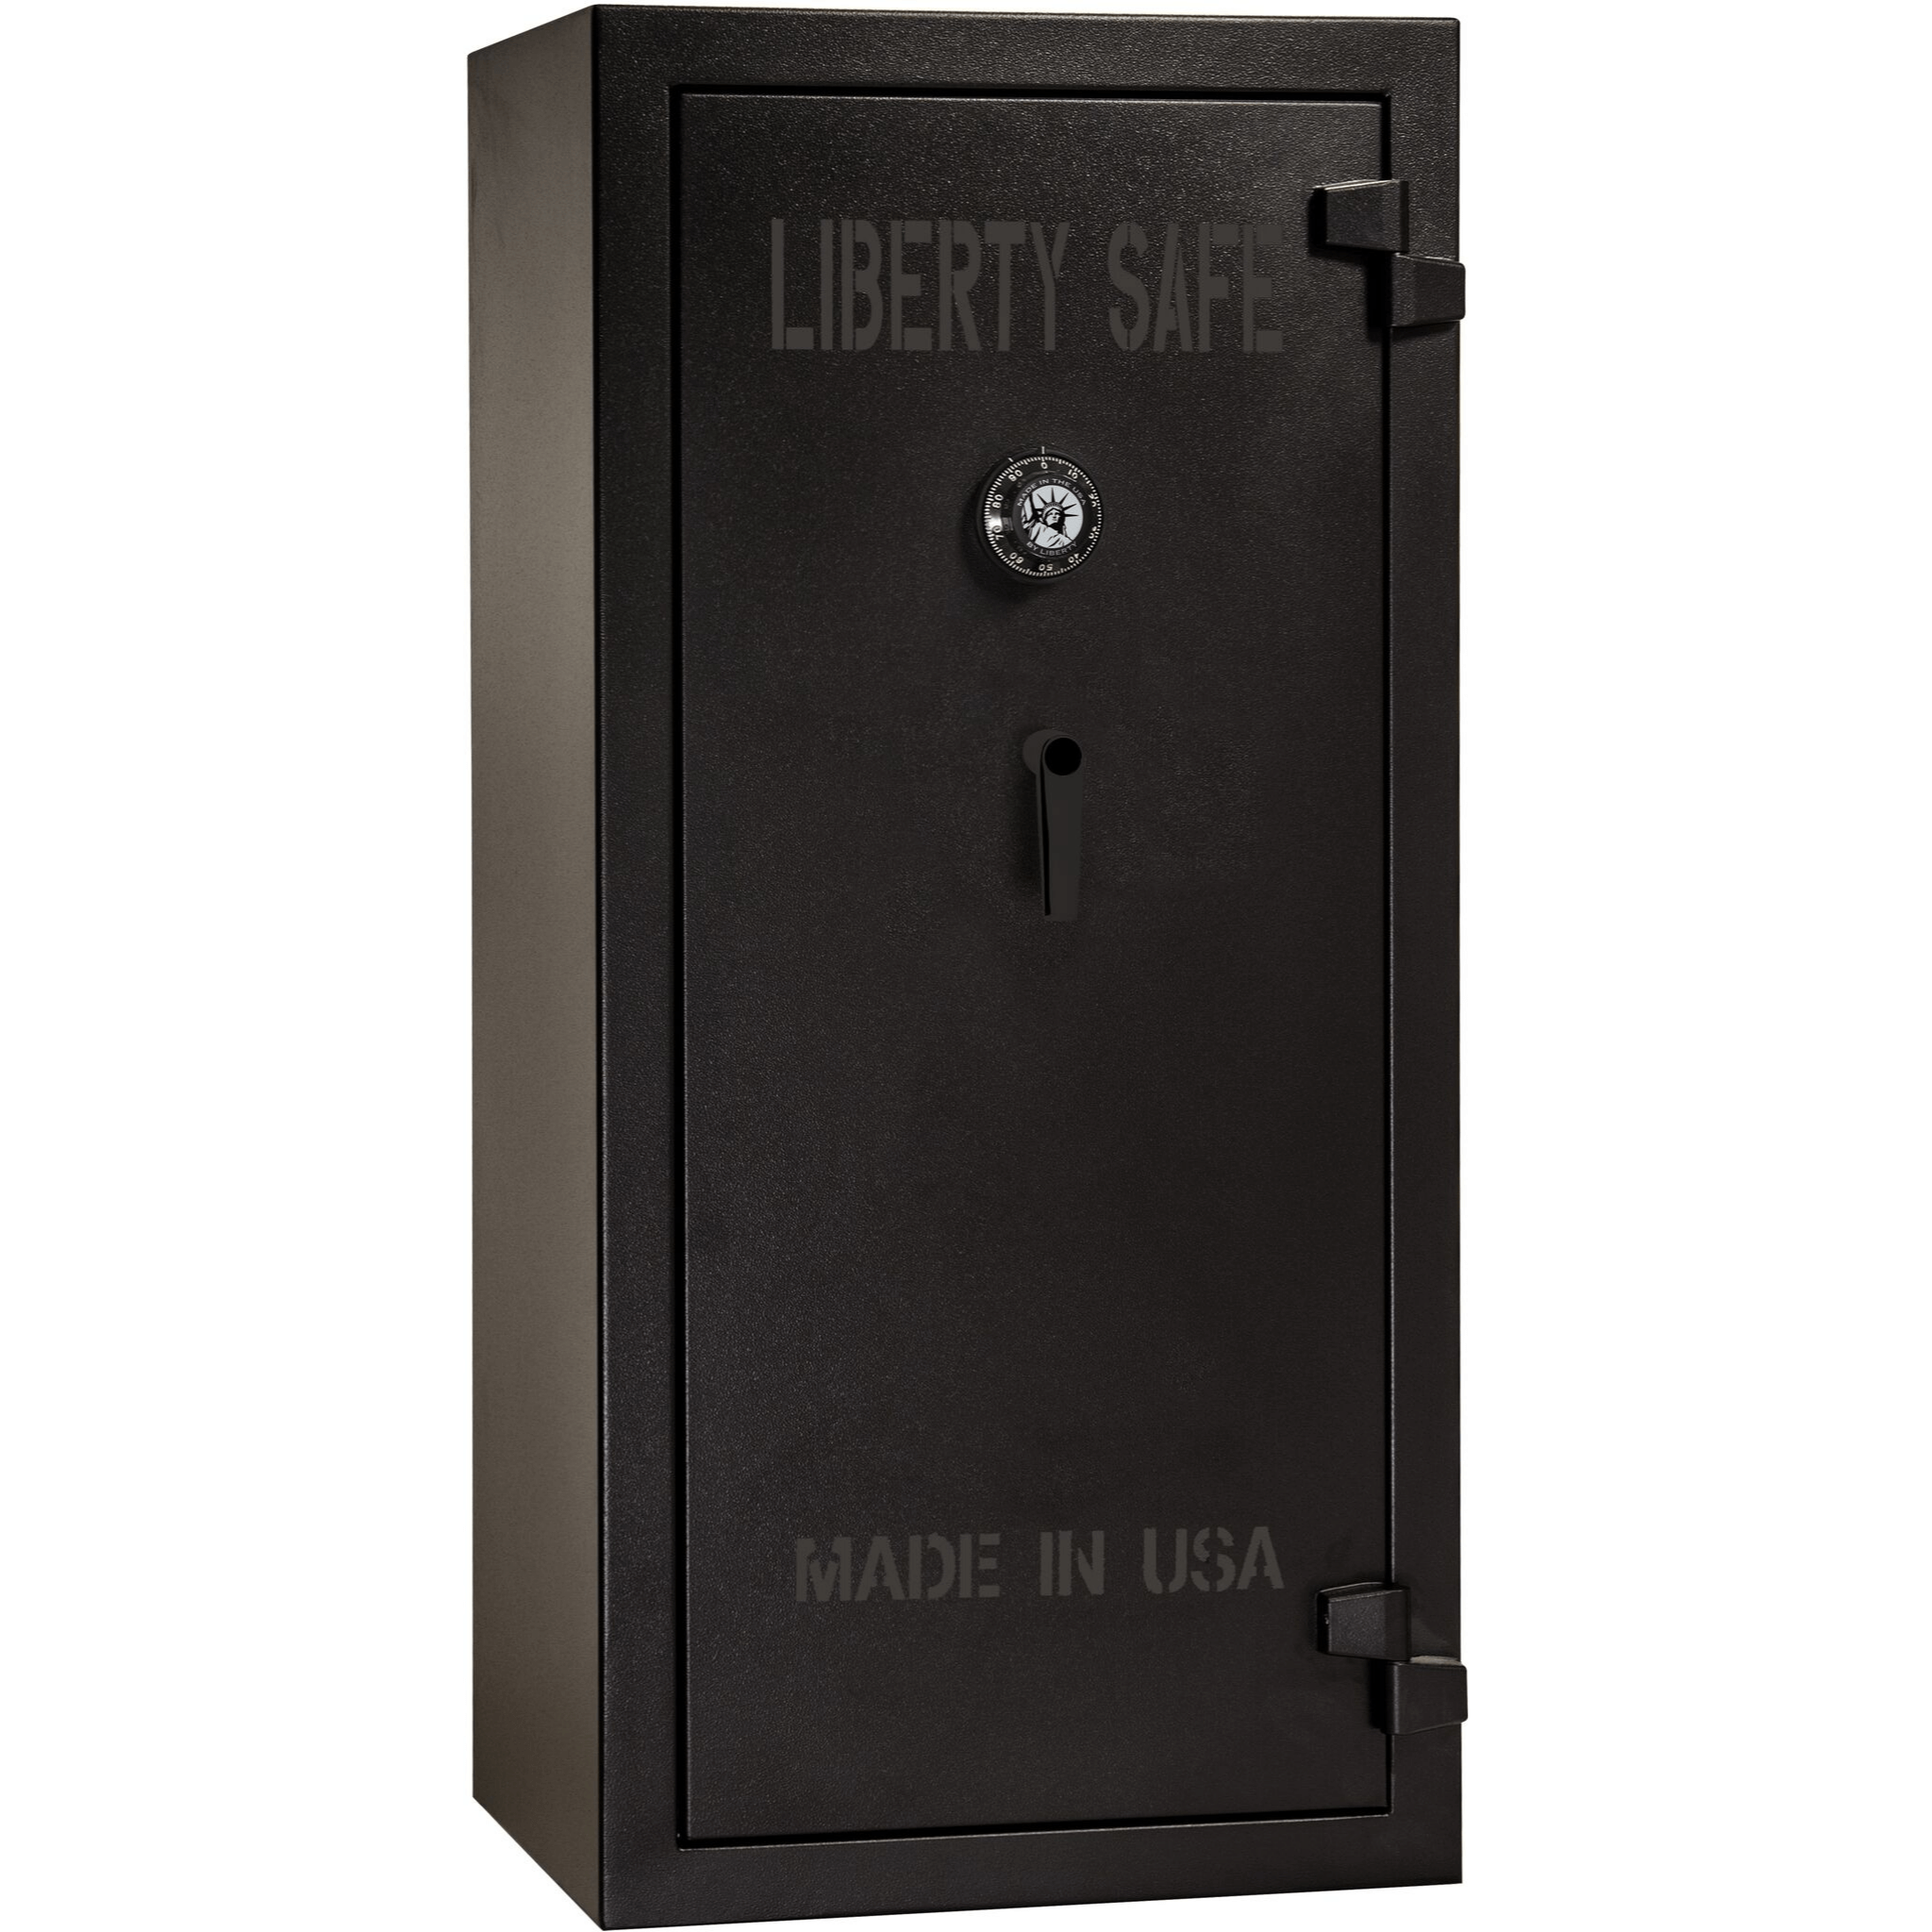 Liberty Safe Offers Wireless Monitoring Device for Gun Safes